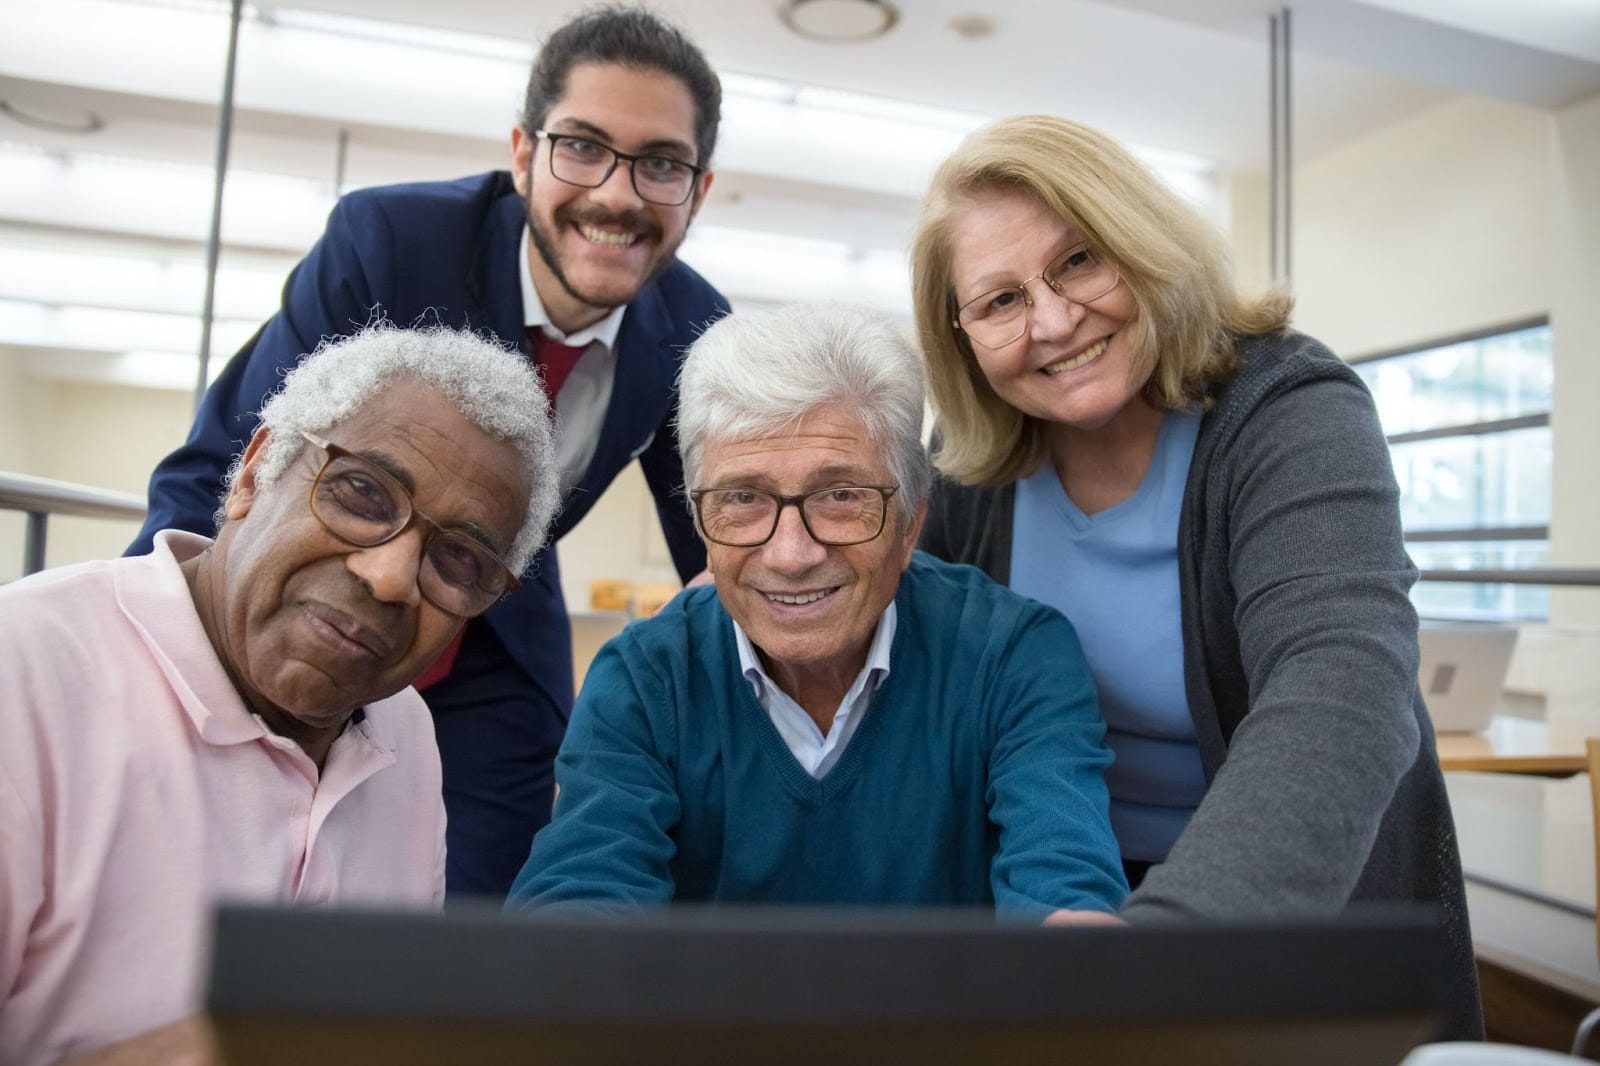 Four people smiling at the camera behind a laptop computer